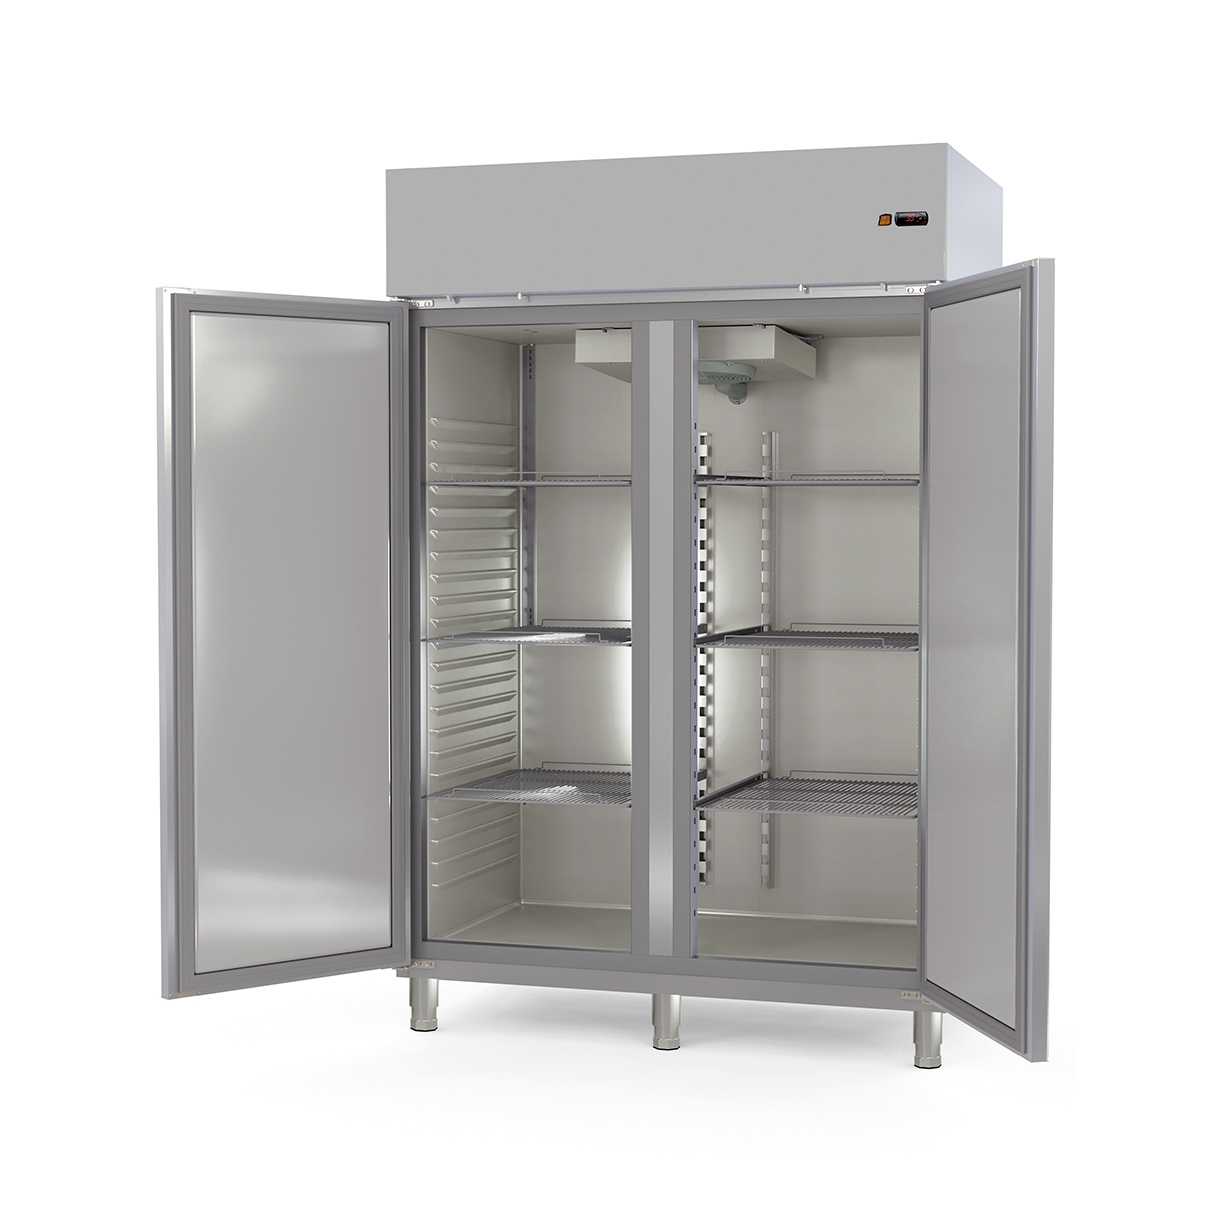 GASTRONORM Refrigerated Cabinet AGD-140